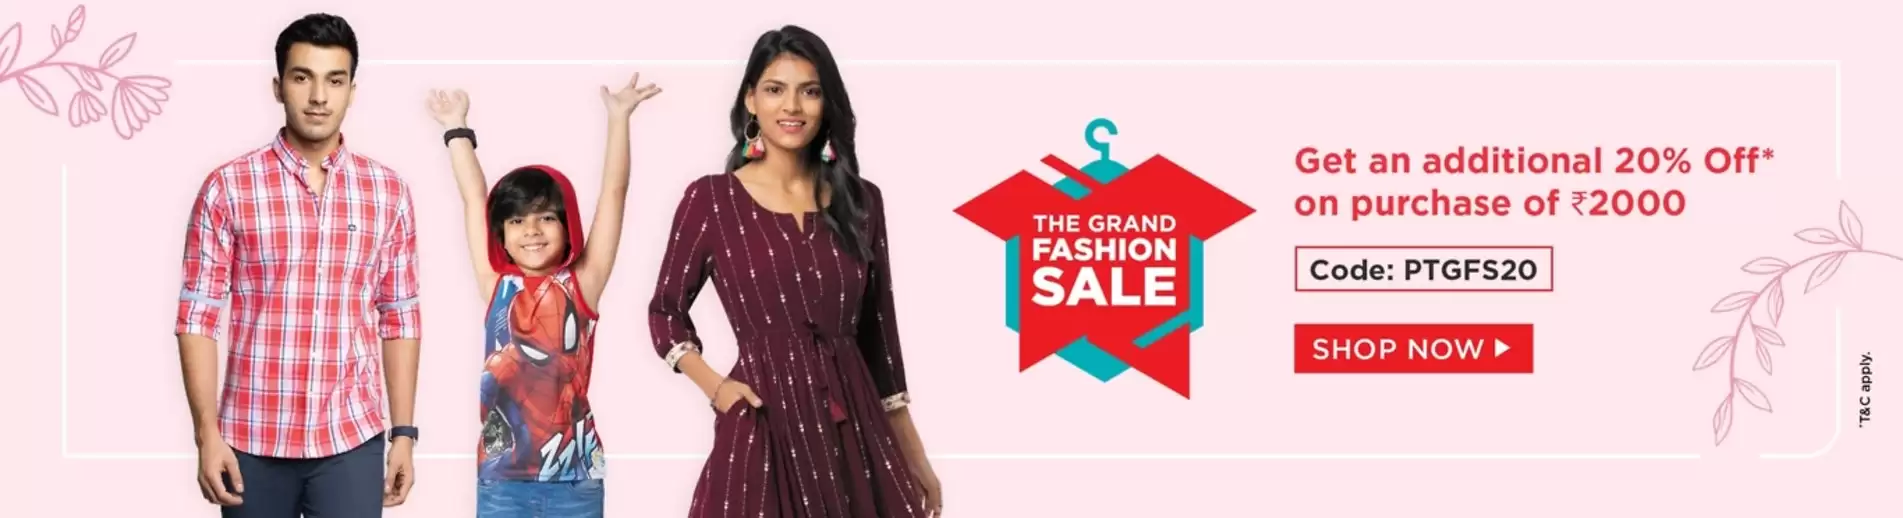 Get An Additional 20% Off With This Grand Fashion Sale Discount Coupon At Pantaloons